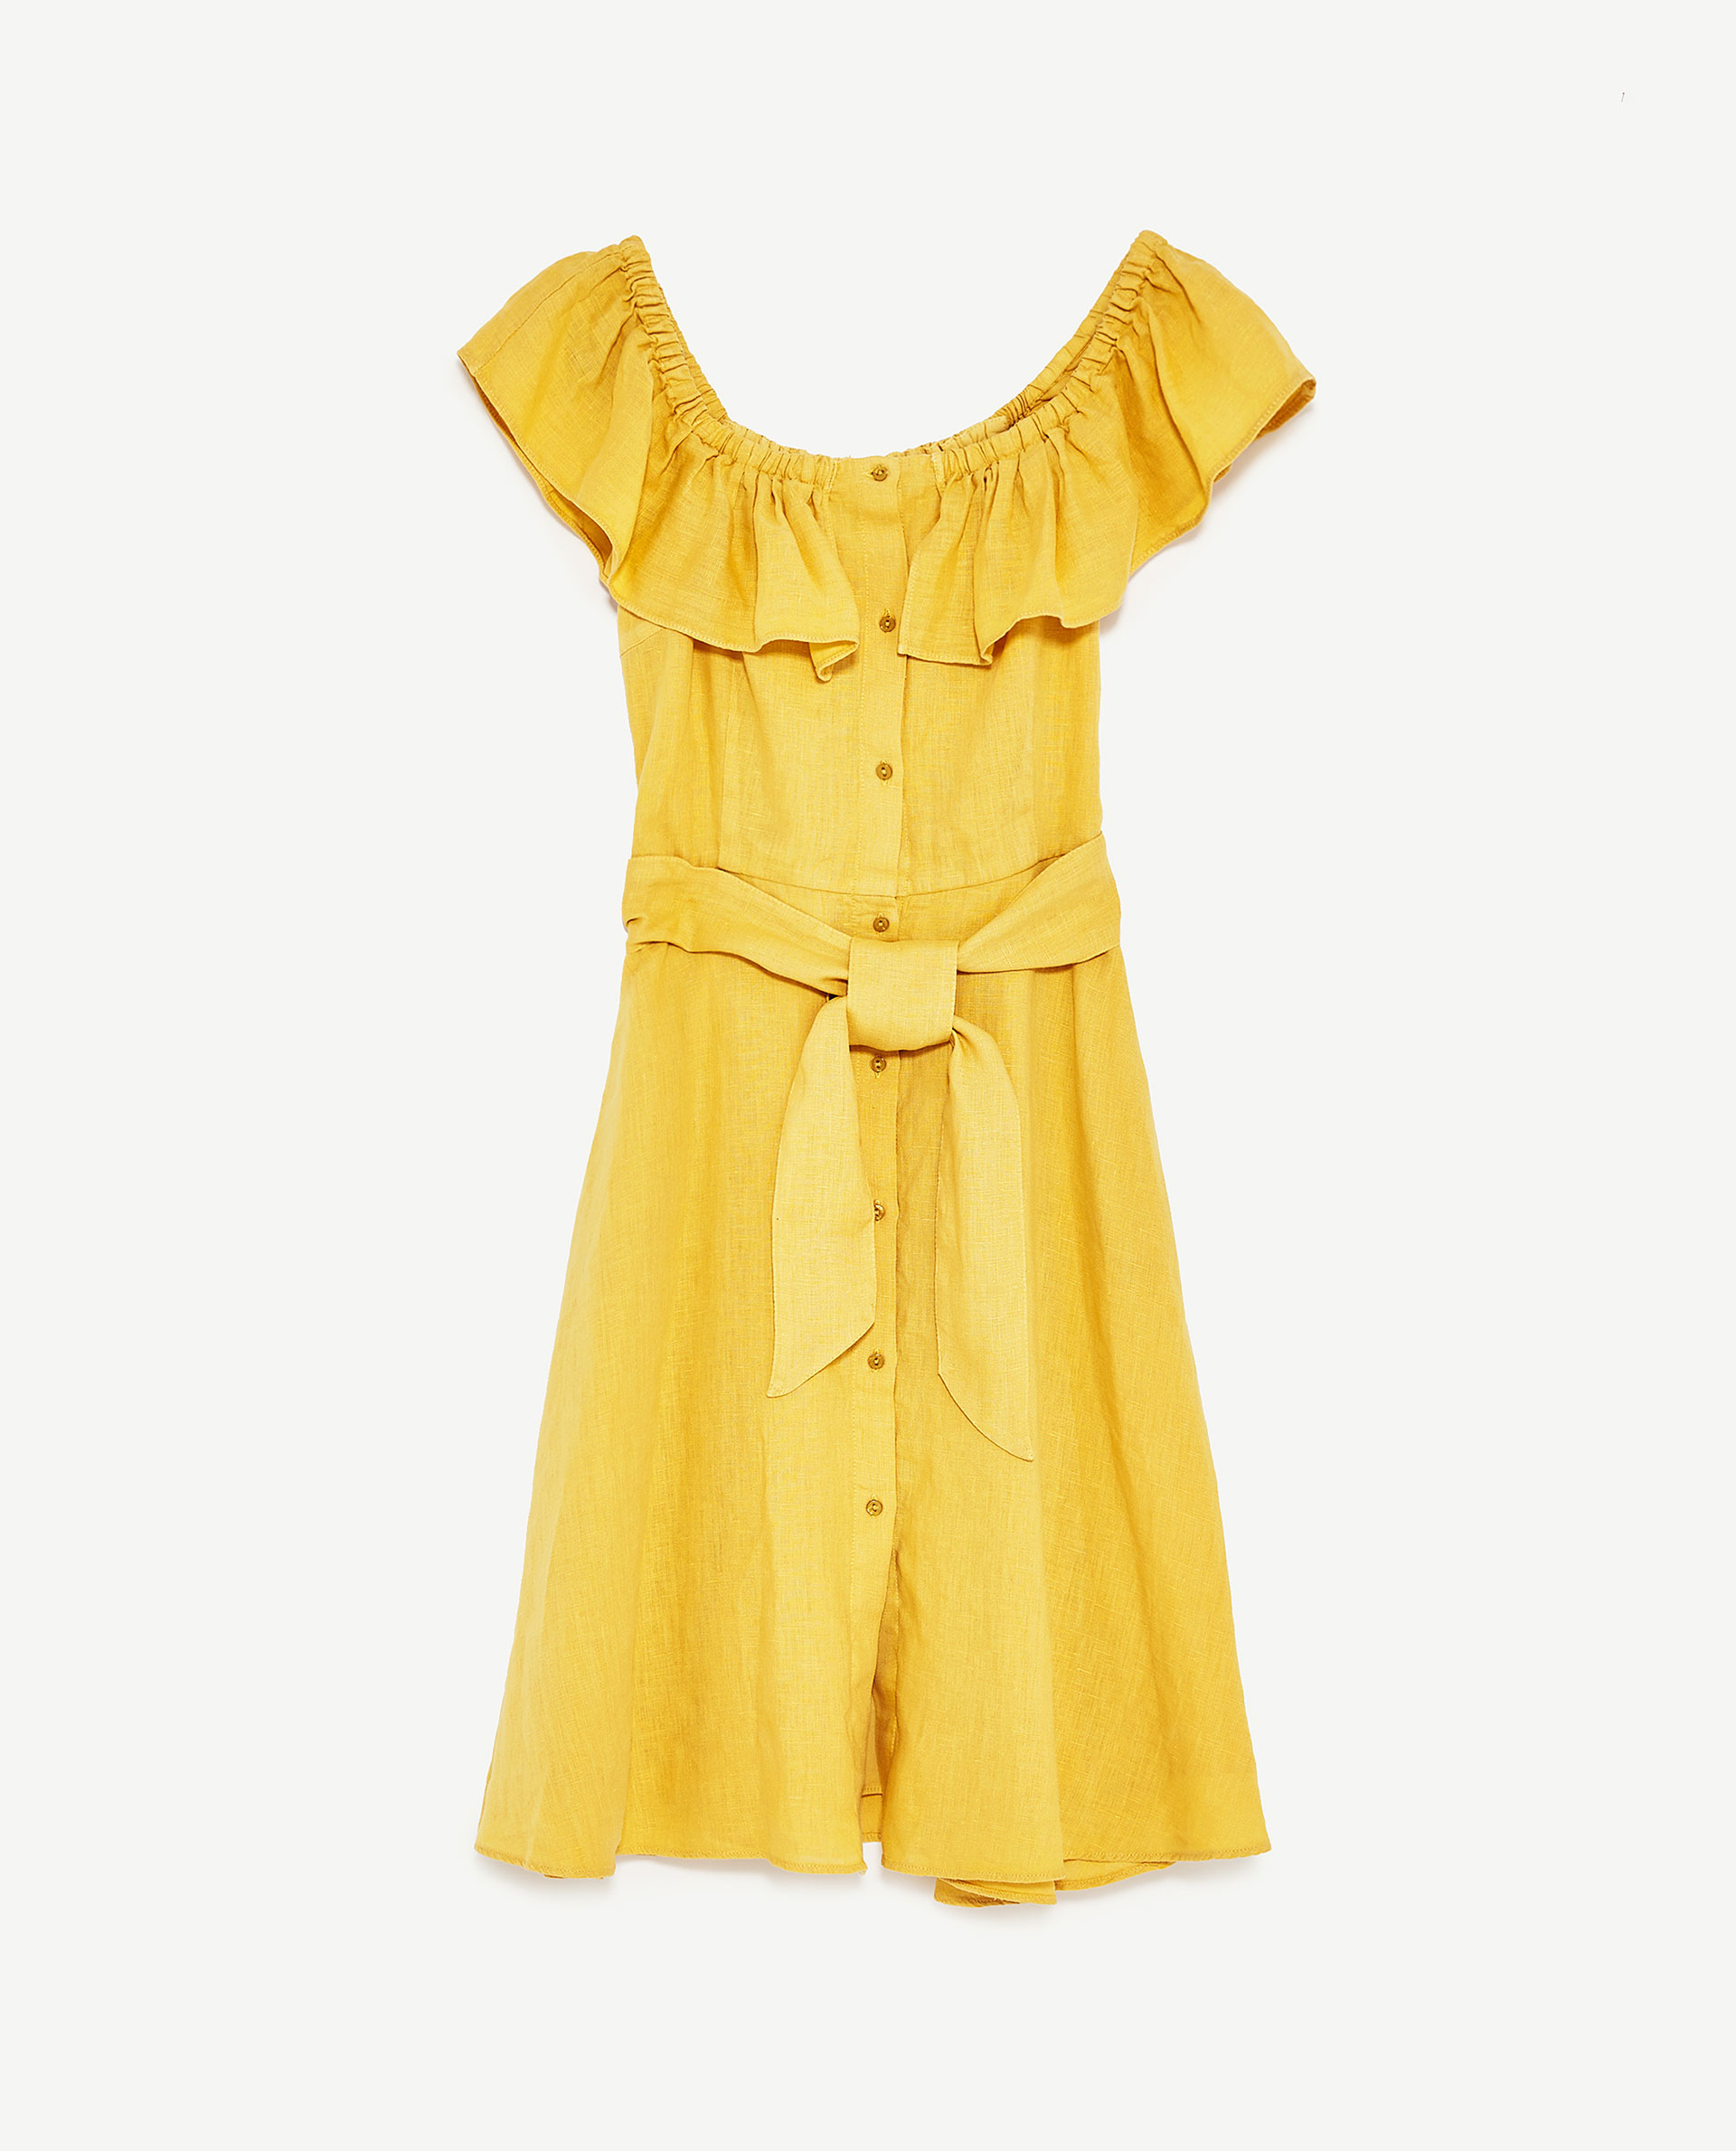 My Top 5 Zara Dresses In Store Right Now – JacquardFlower